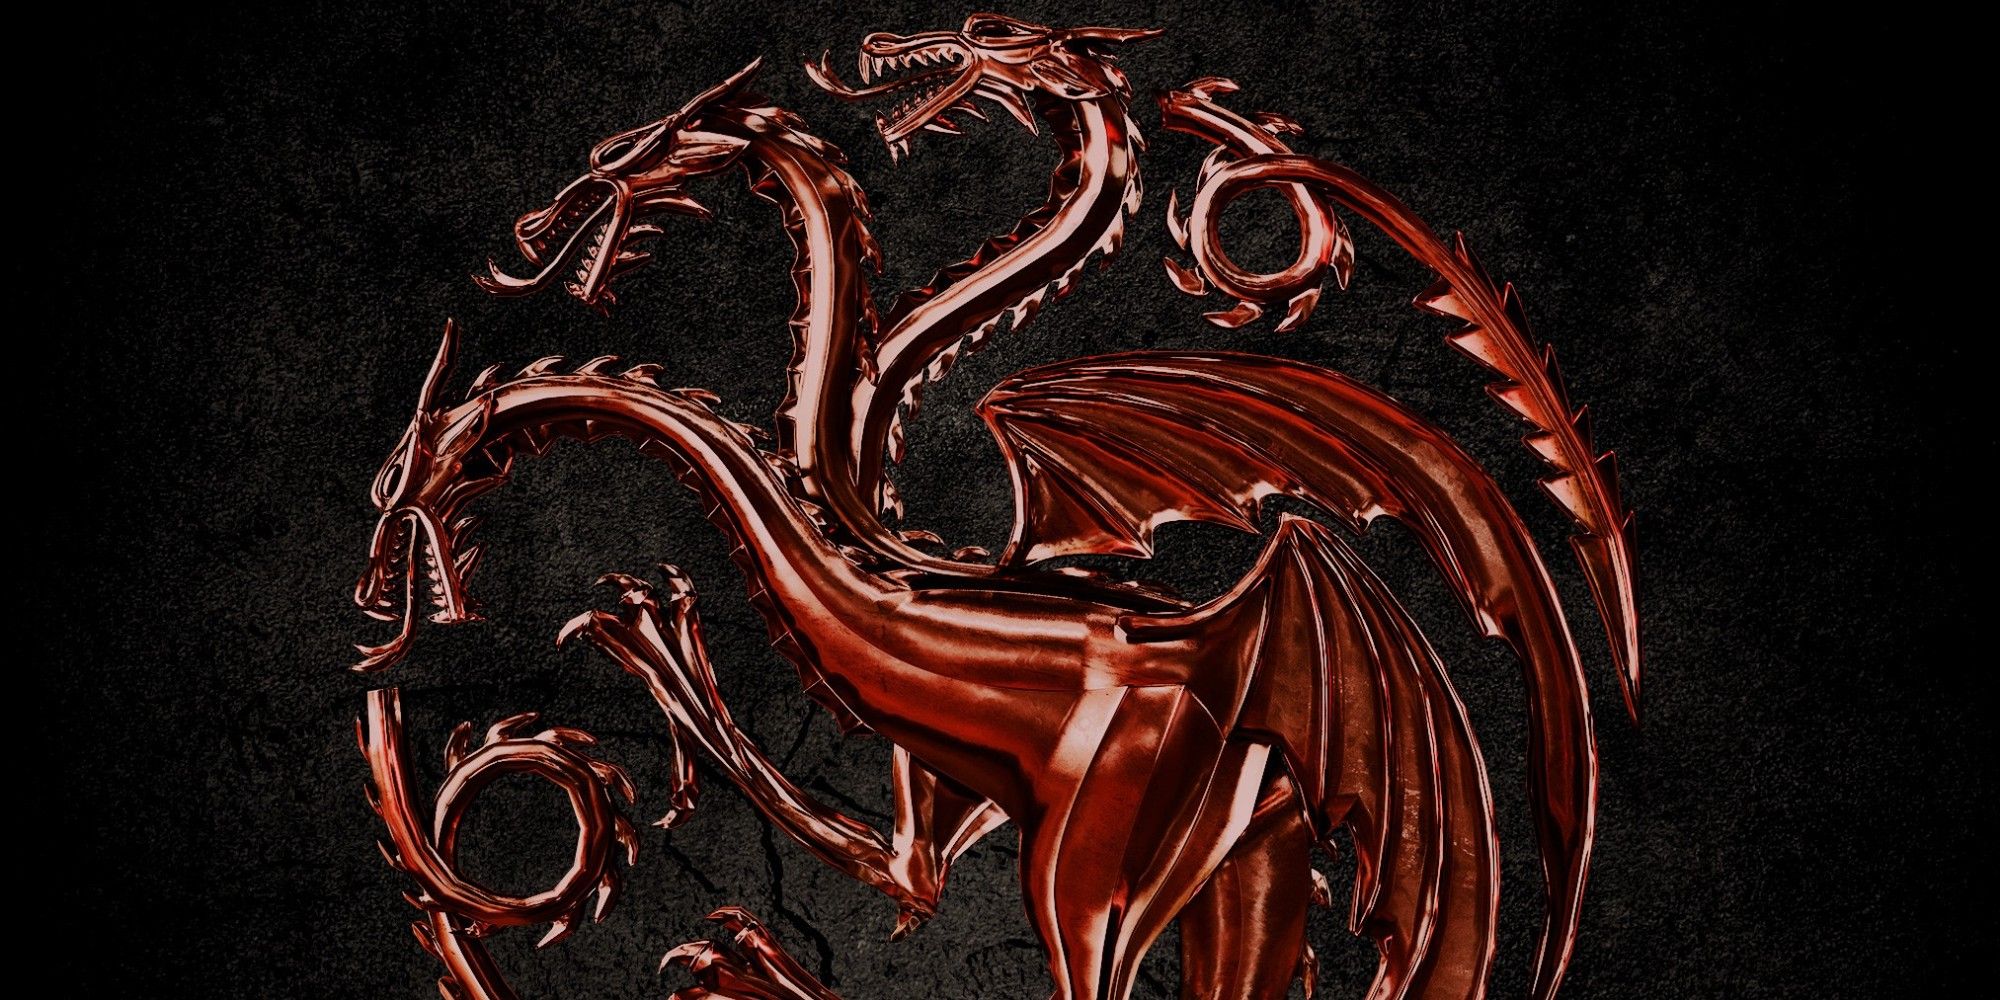 Game of Thrones House of the Dragons logo